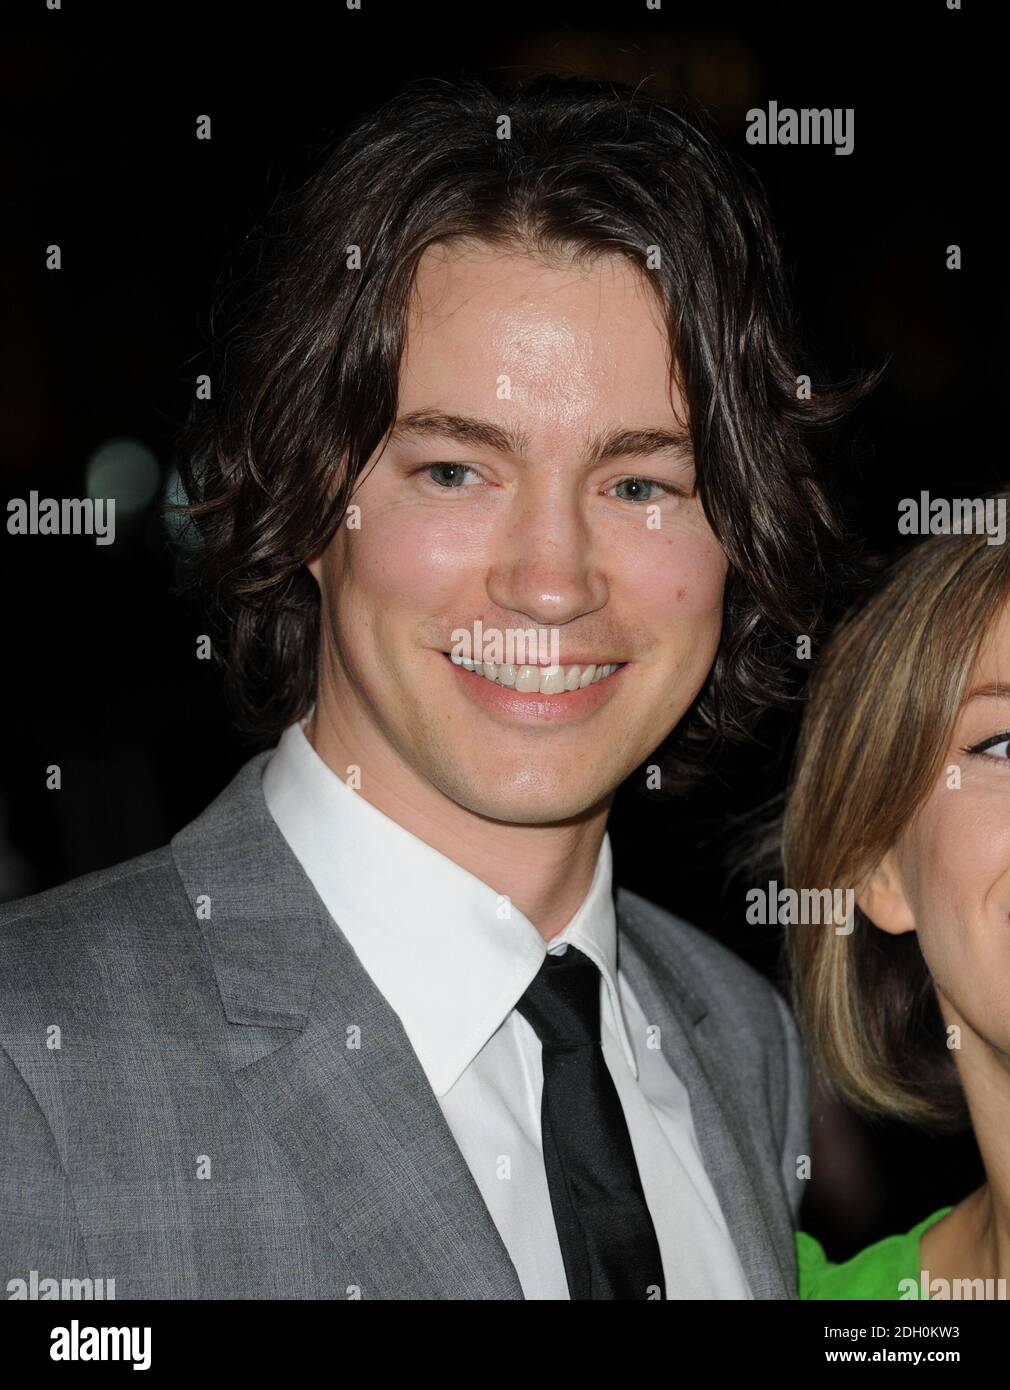 Tom Wisdom arriving for the premiere of The Boat That Rocked at the Odeon Leicester Square, London. Stock Photo